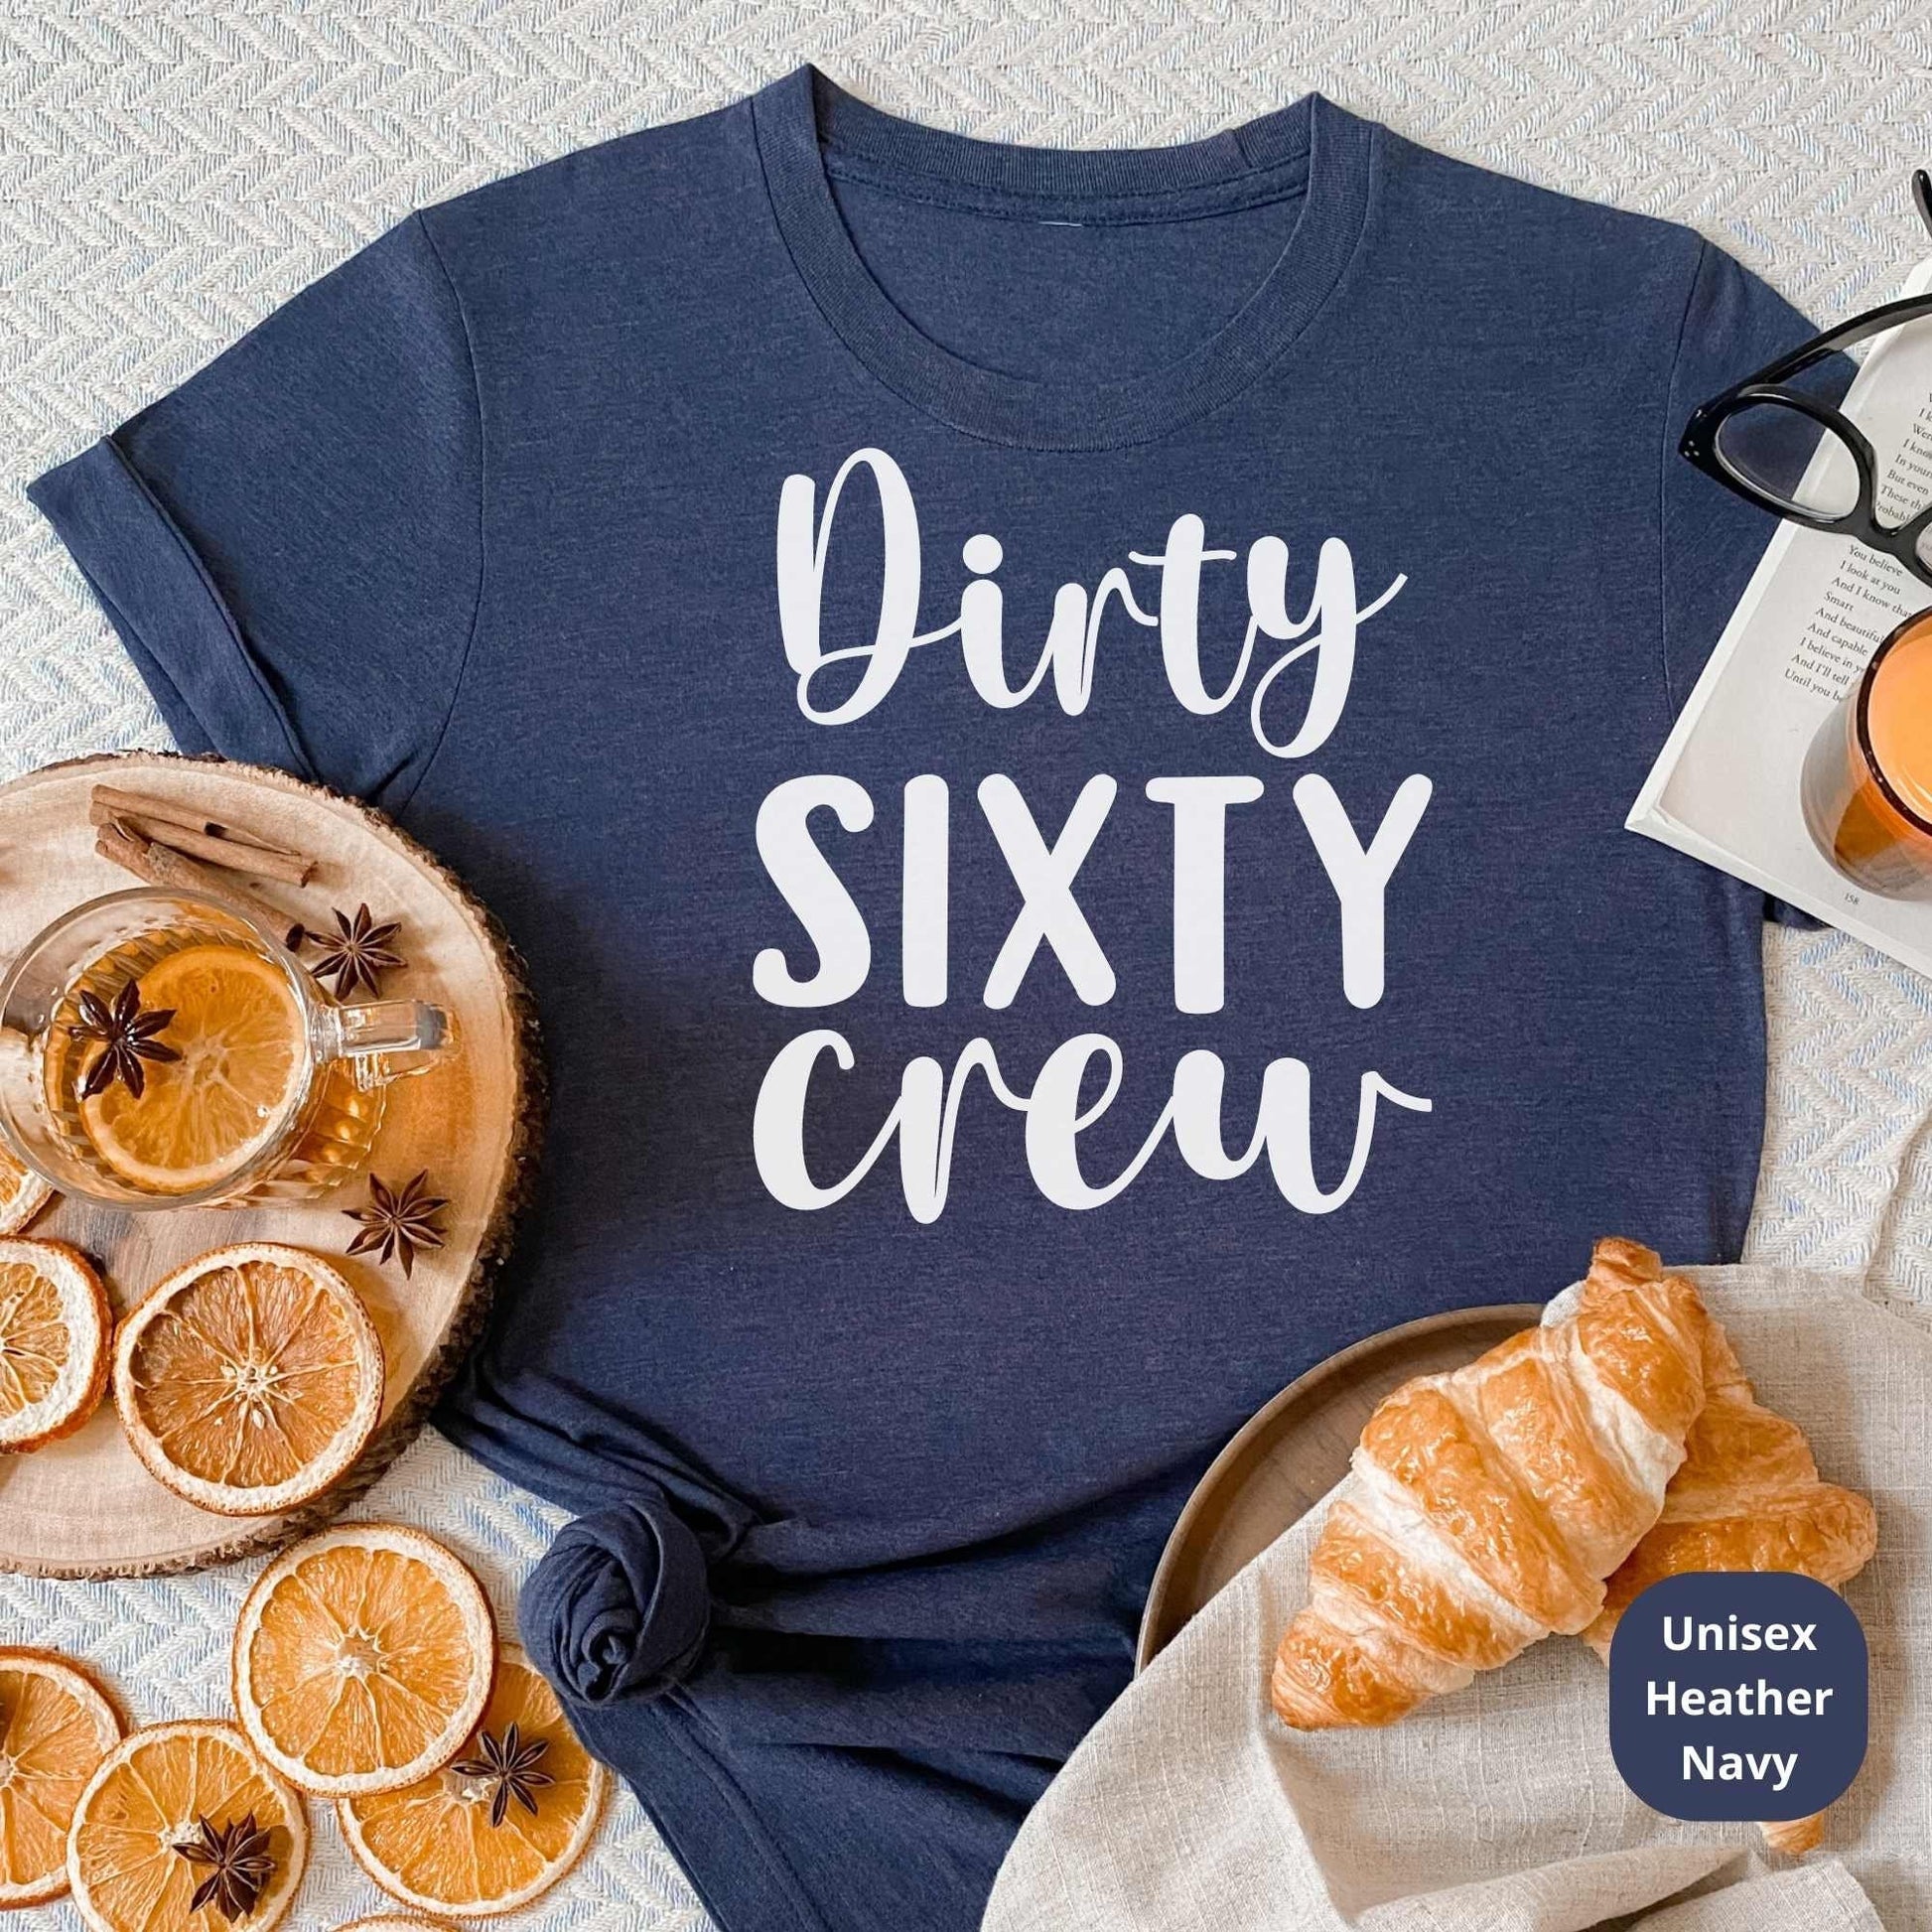 60th Birthday Crew Shirt, 60th Birthday Gift, Great for Grand Parents, Mom, Dad, Aunt, Cousins & Loved Ones Bday or Anniversary Celebration HMDesignStudioUS